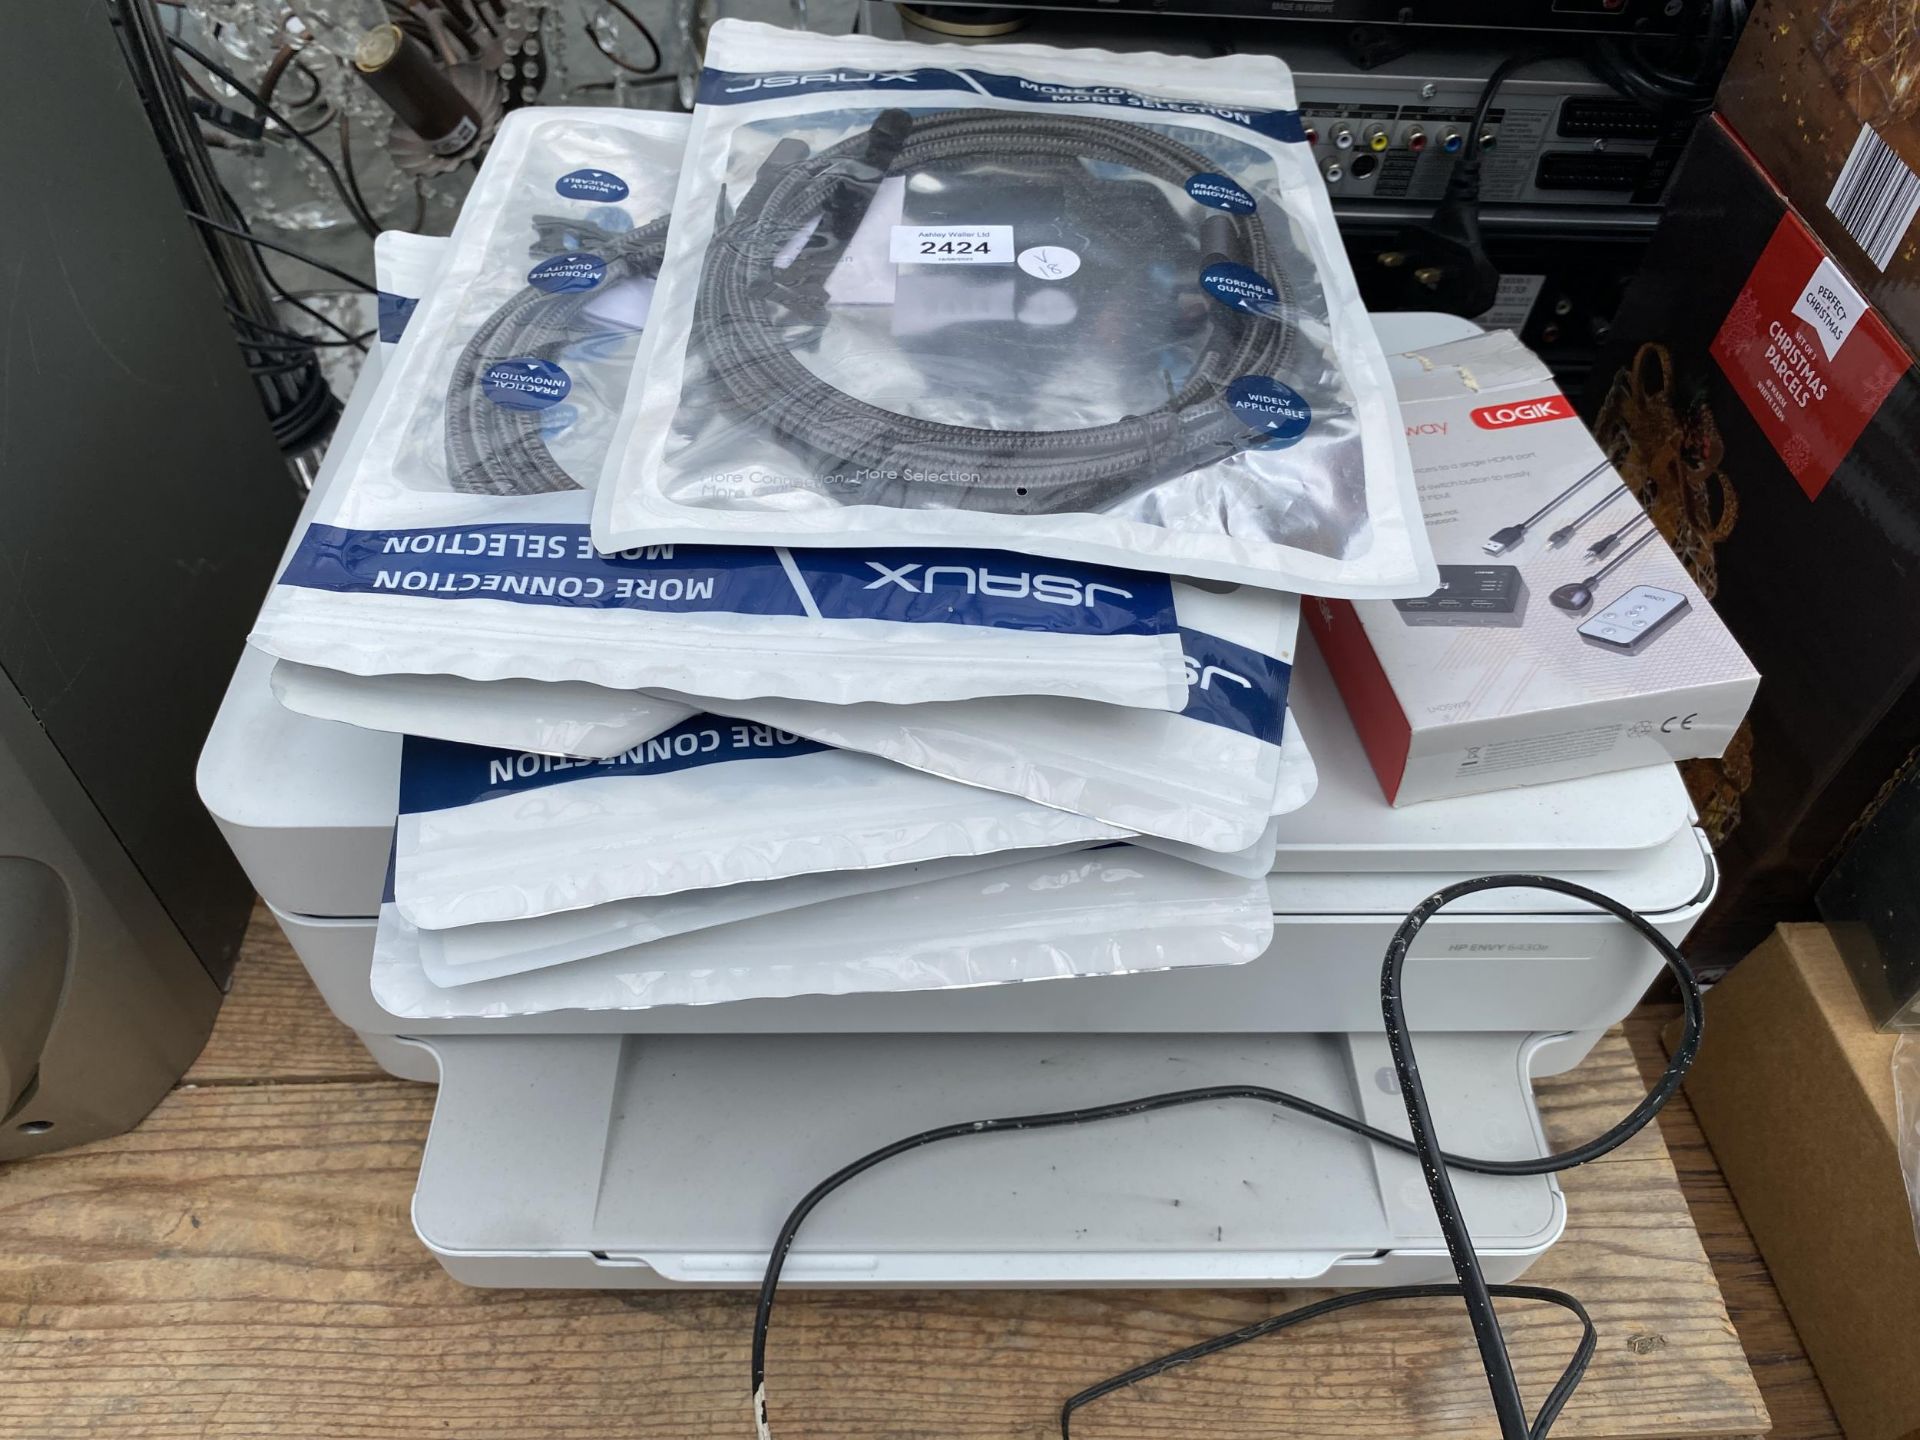 A HP PRINTER AND A QUANTITY OF NEW JSAUX HDMI CABLES